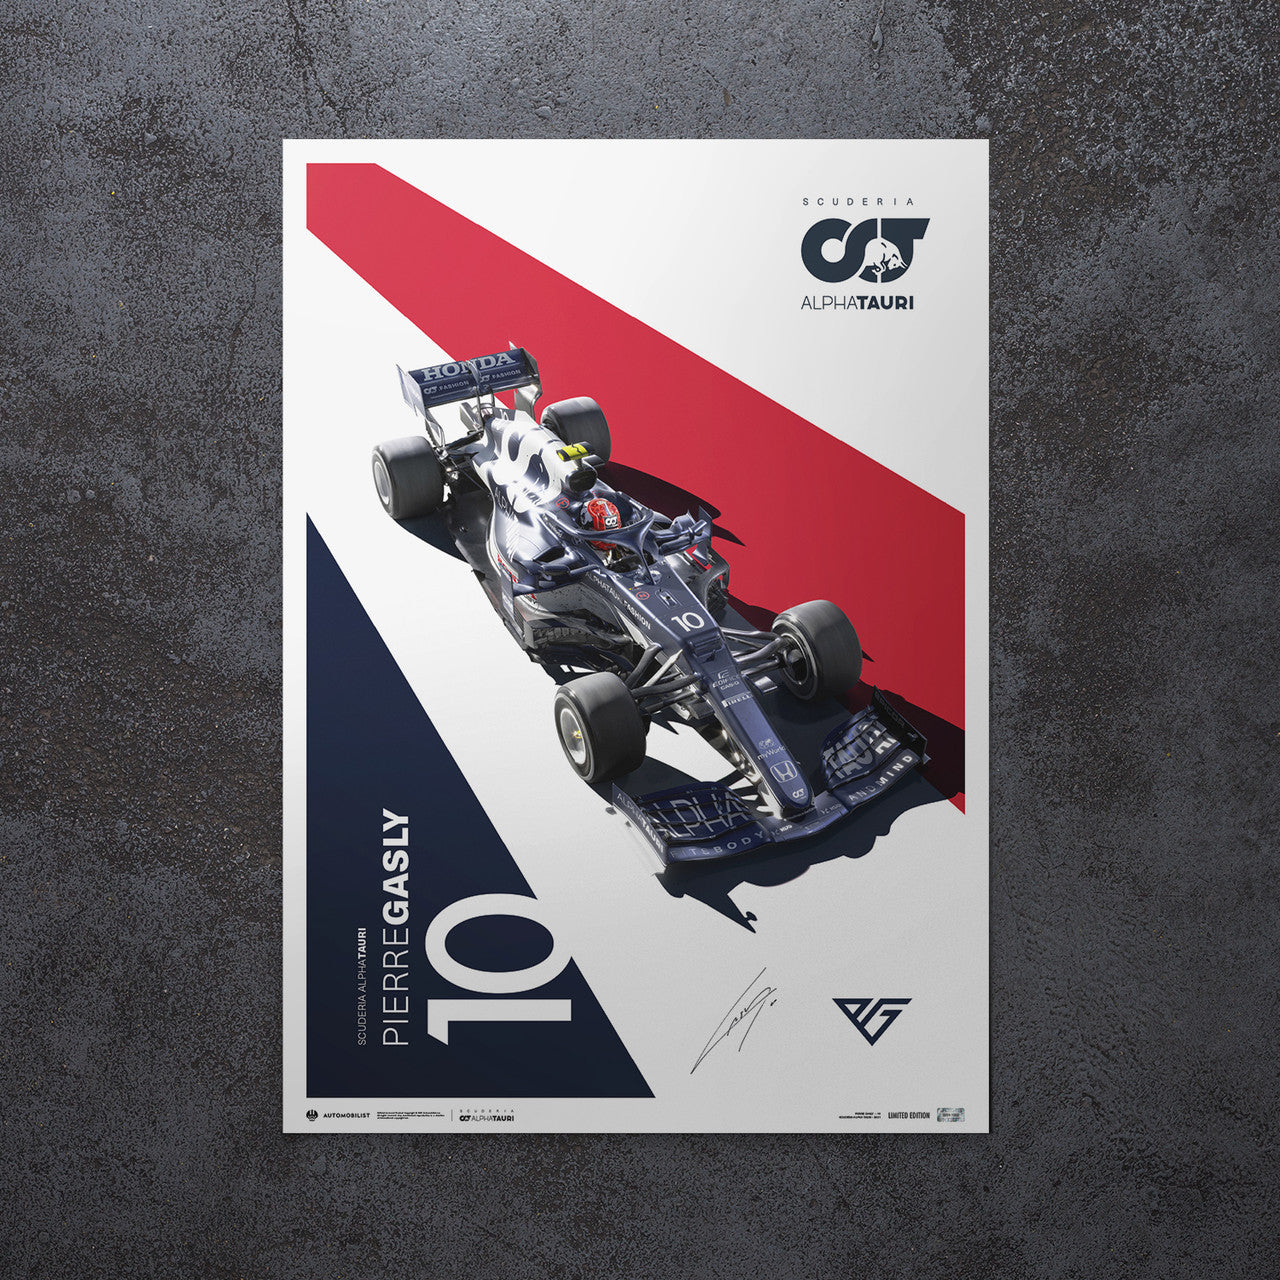 Signed by Pierre Gasly - Scuderia AlphaTauri - Pierre Gasly - 2021 | Limited Edition